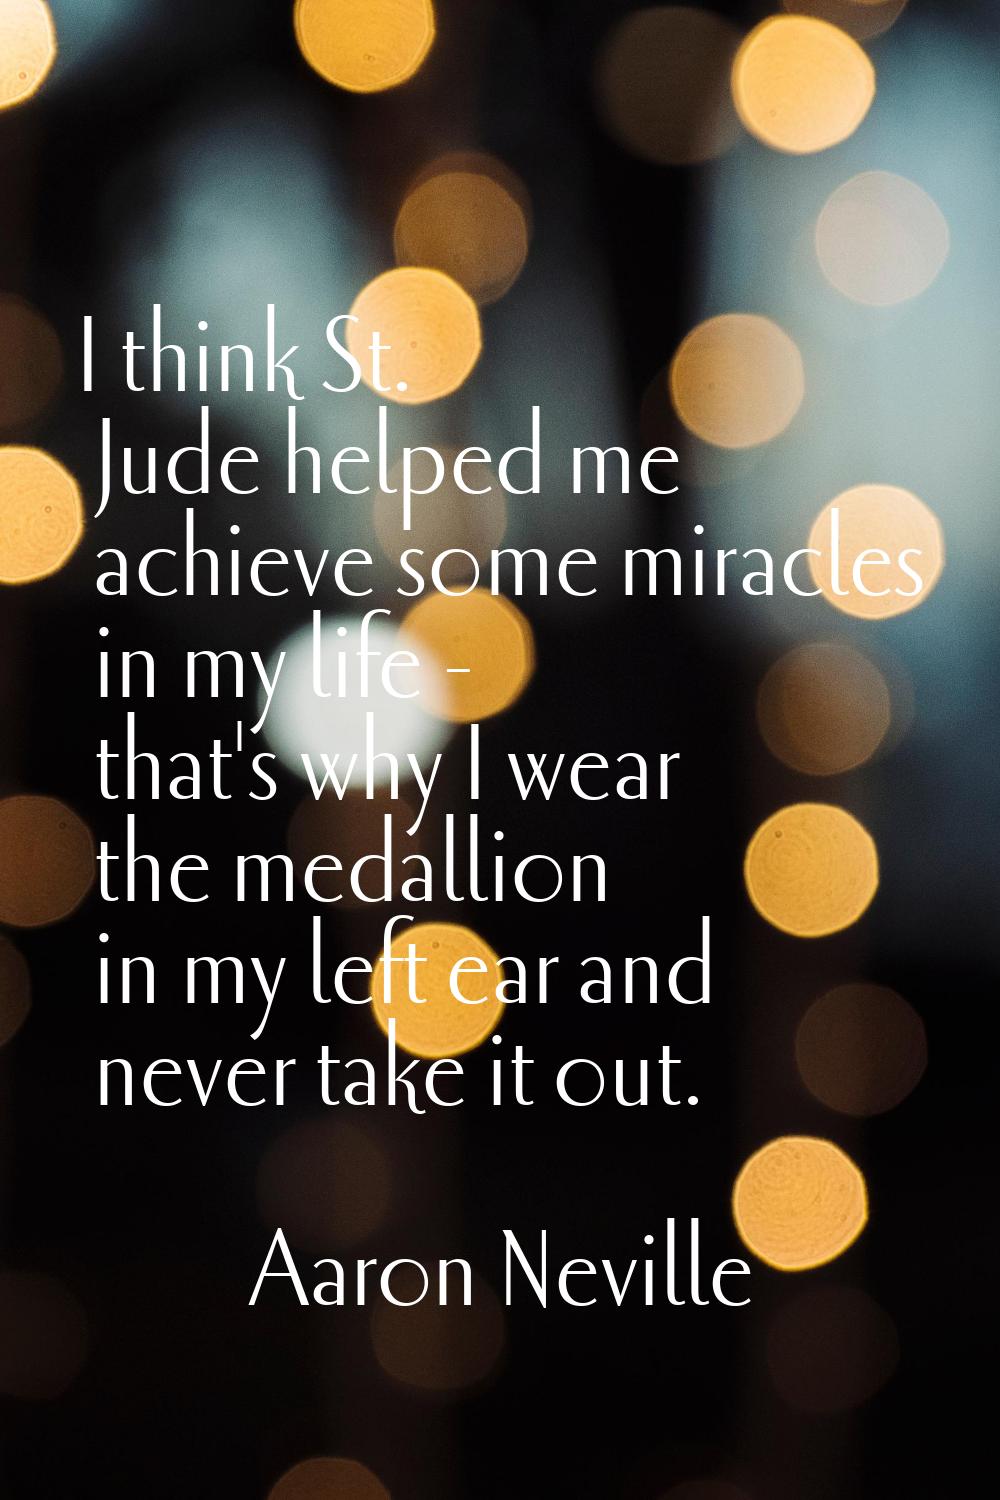 I think St. Jude helped me achieve some miracles in my life - that's why I wear the medallion in my